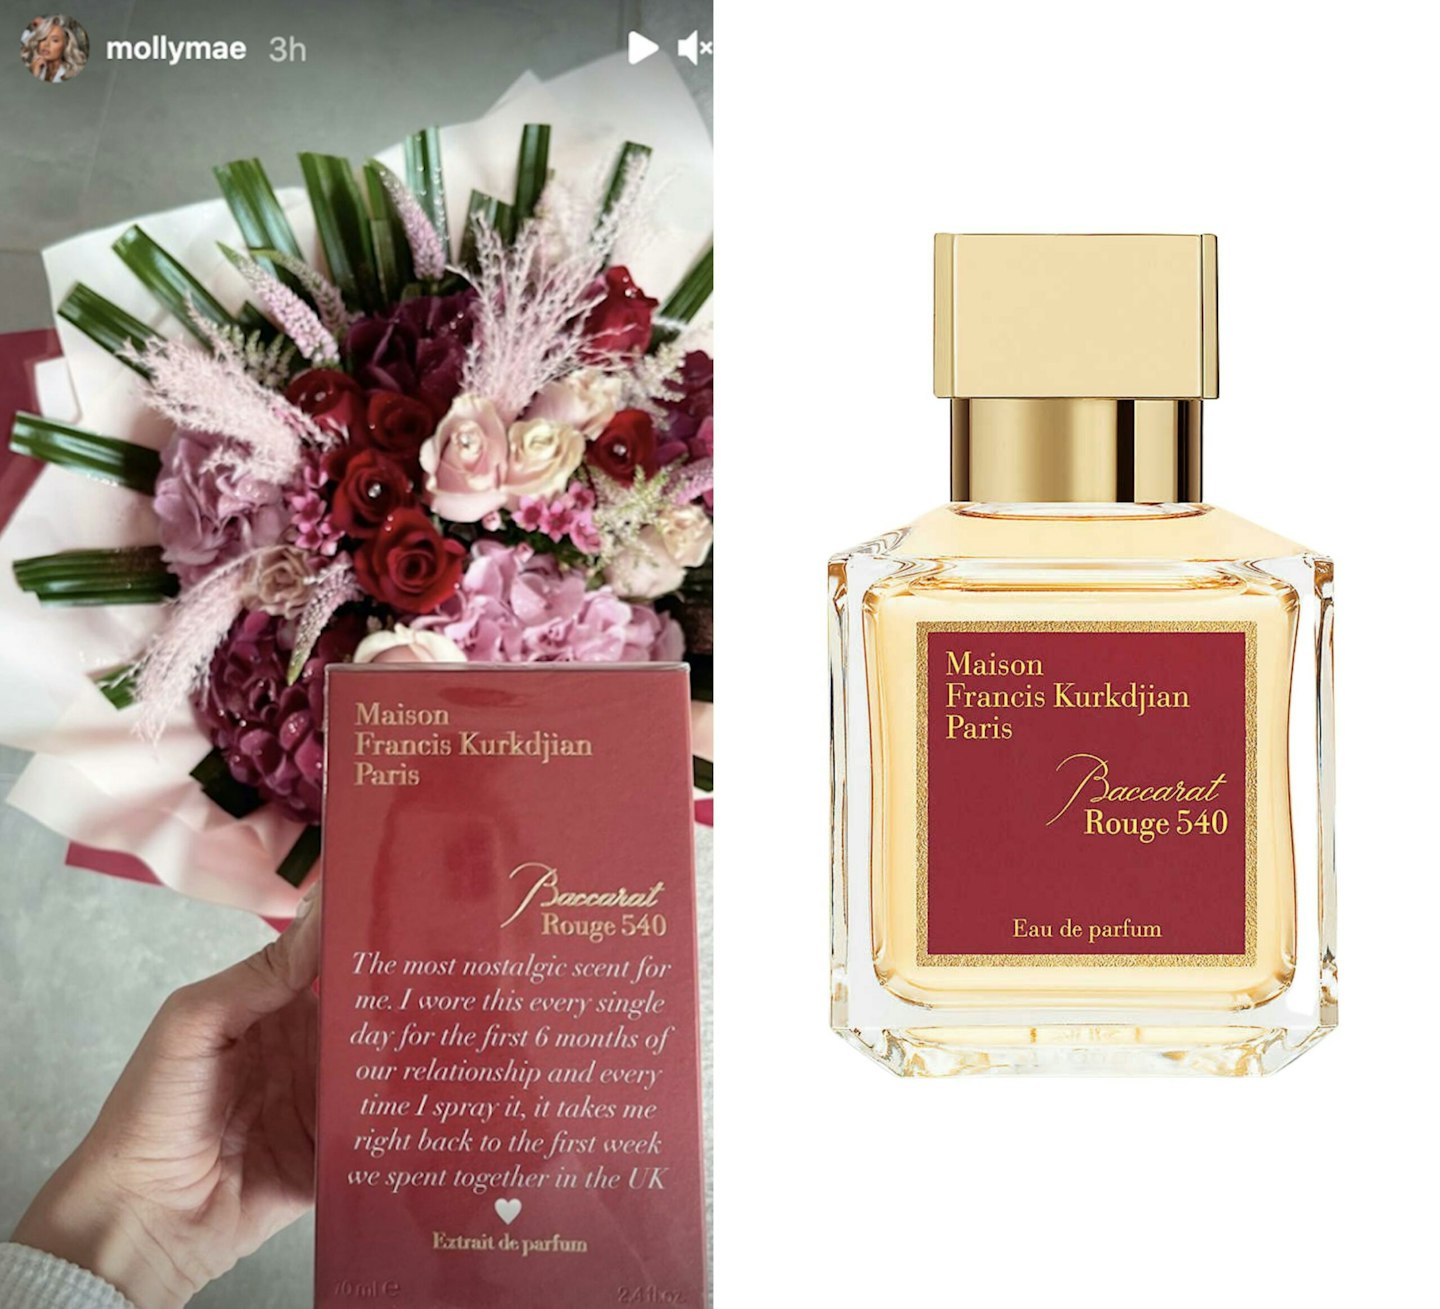 BEST DUPE FOR BACCARAT ROUGE 540